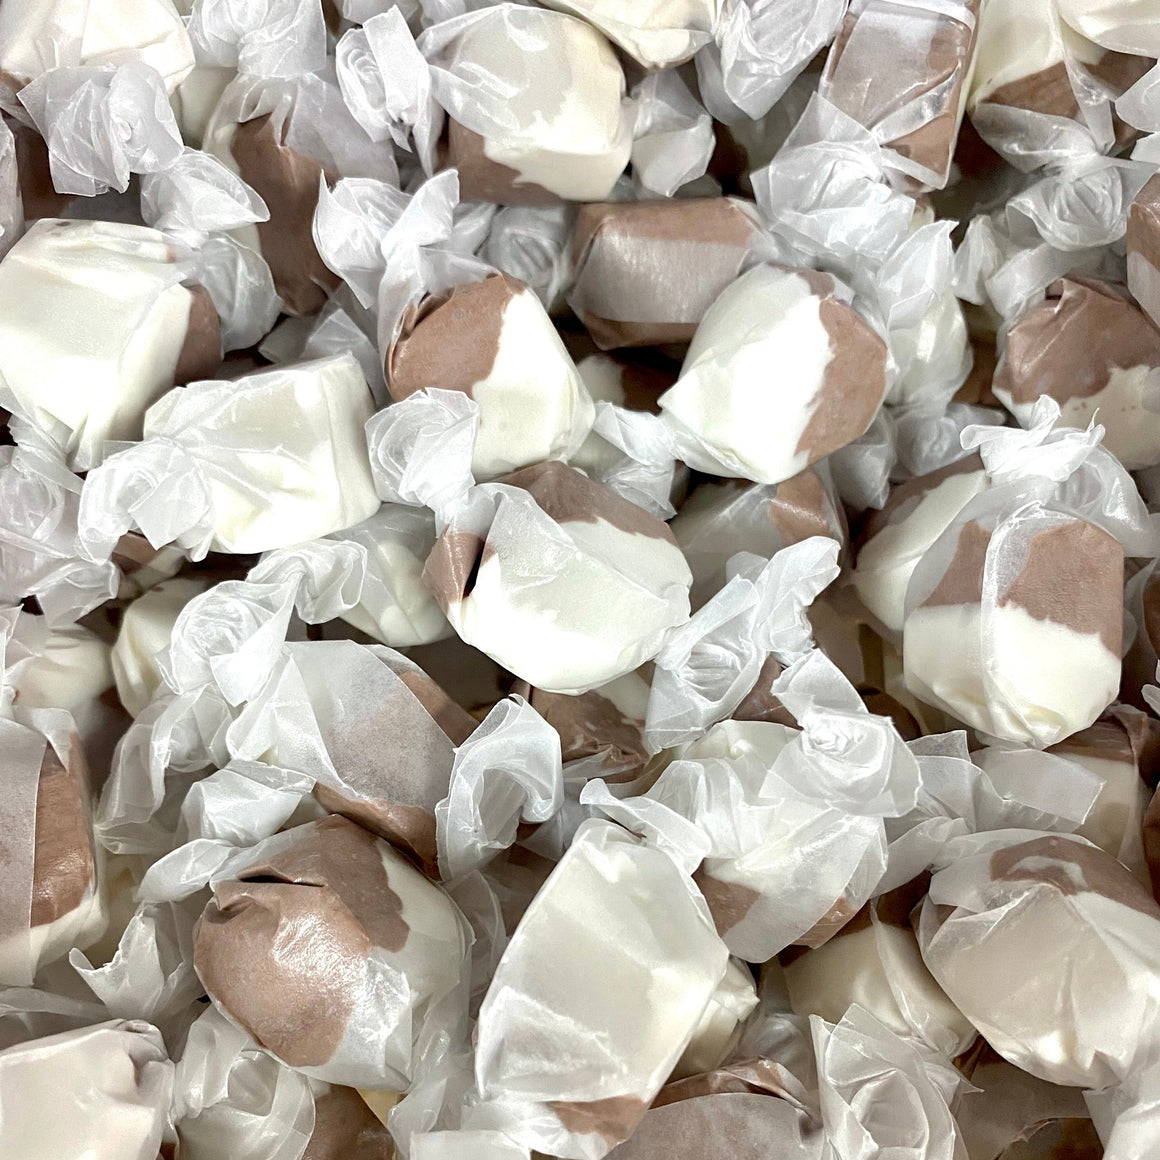 All City Candy Root Beer Float Salt Water Taffy - 3 LB Bulk Bag Bulk Unwrapped Sweet Candy Company For fresh candy and great service, visit www.allcitycandy.com